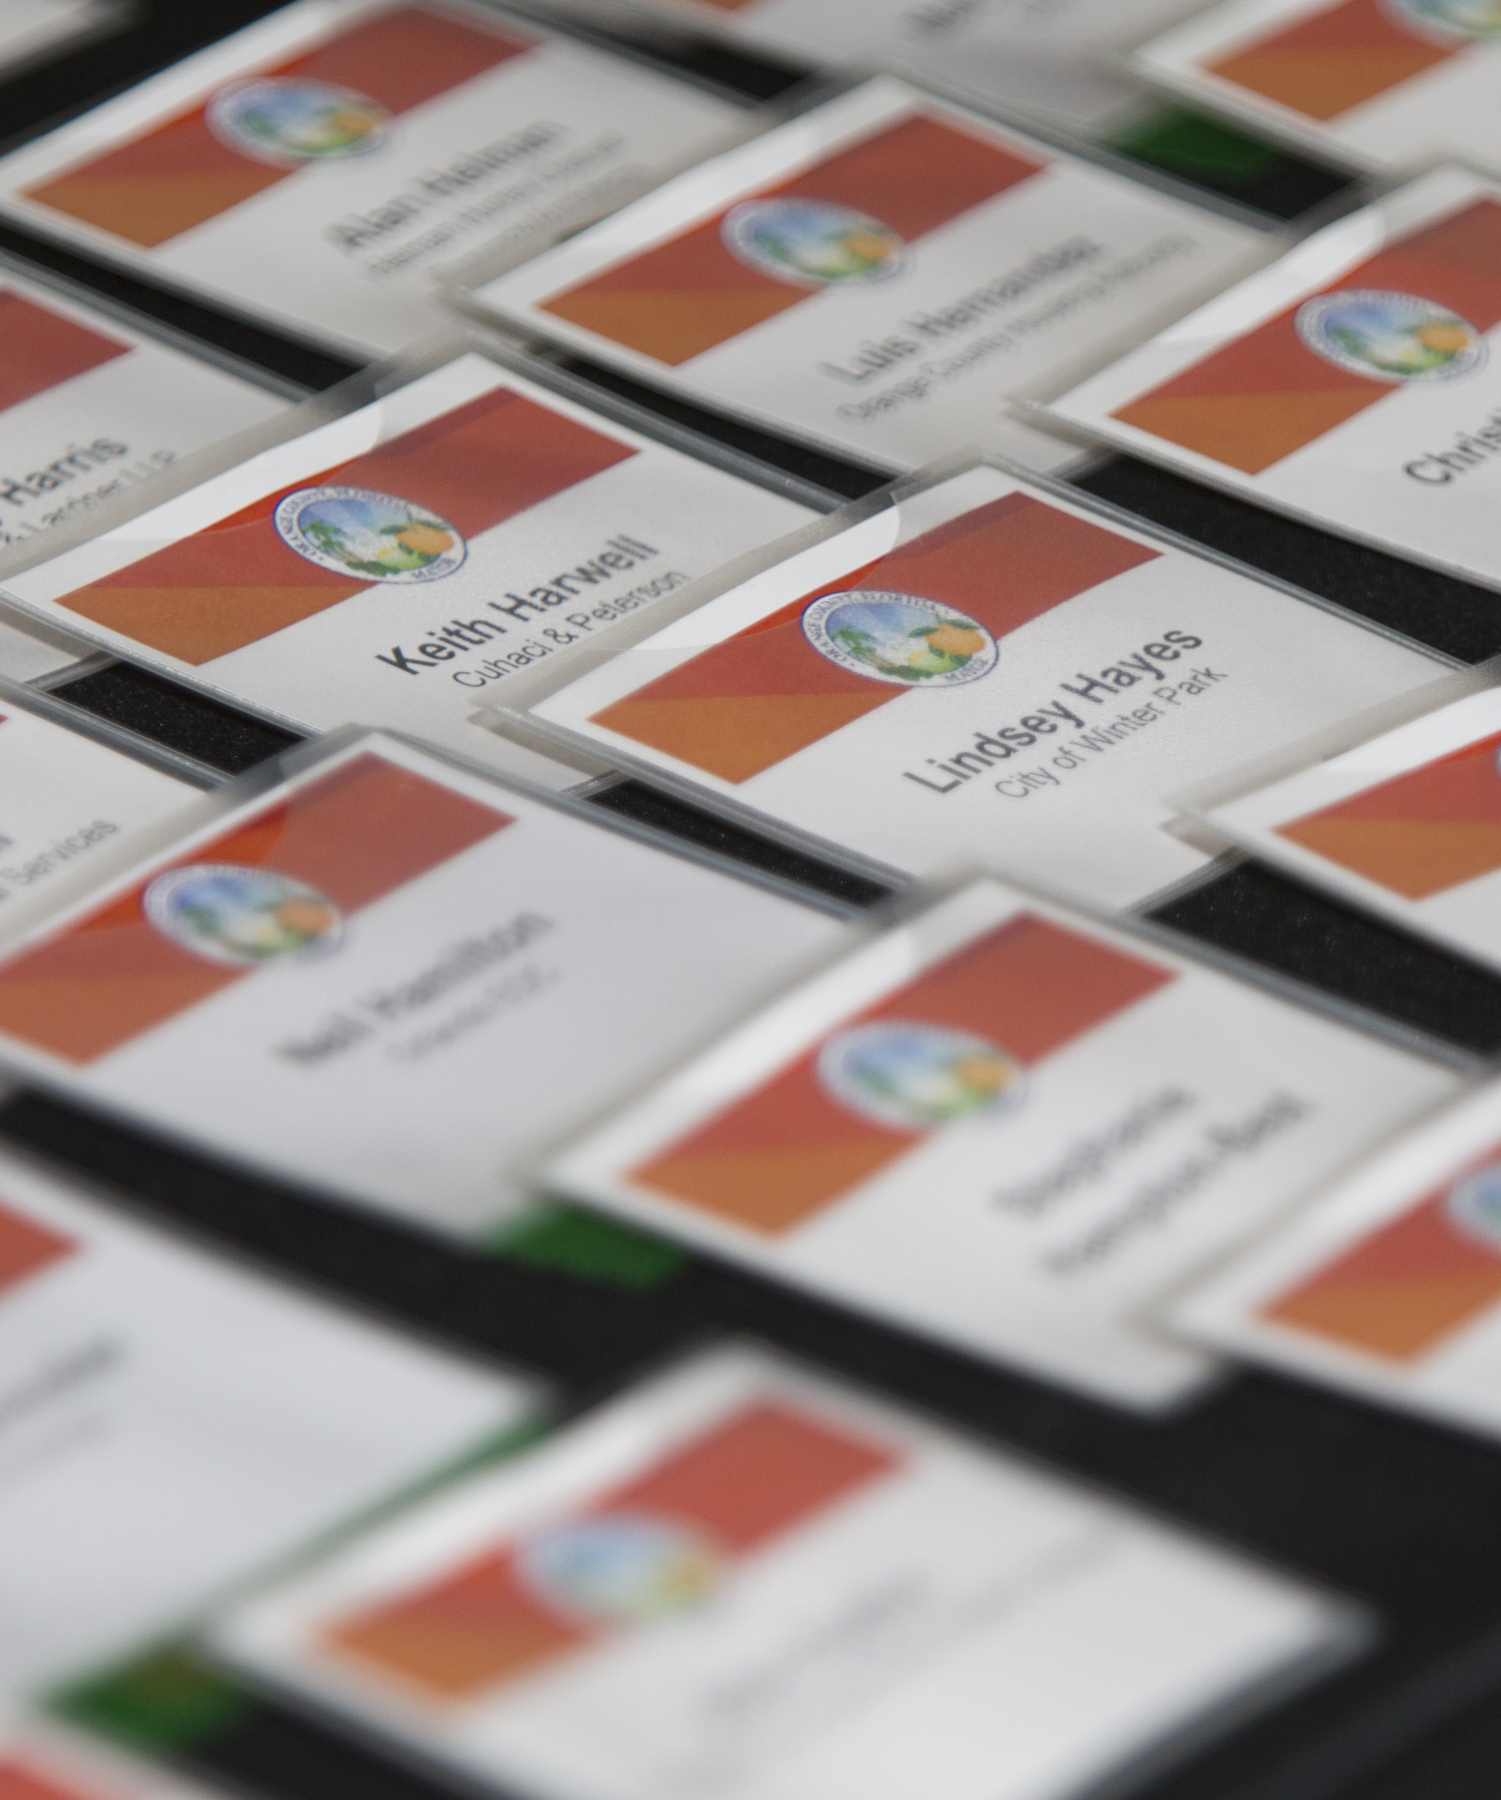 Image of Name Badges at Economic Summit, Links to Economic Summit Page